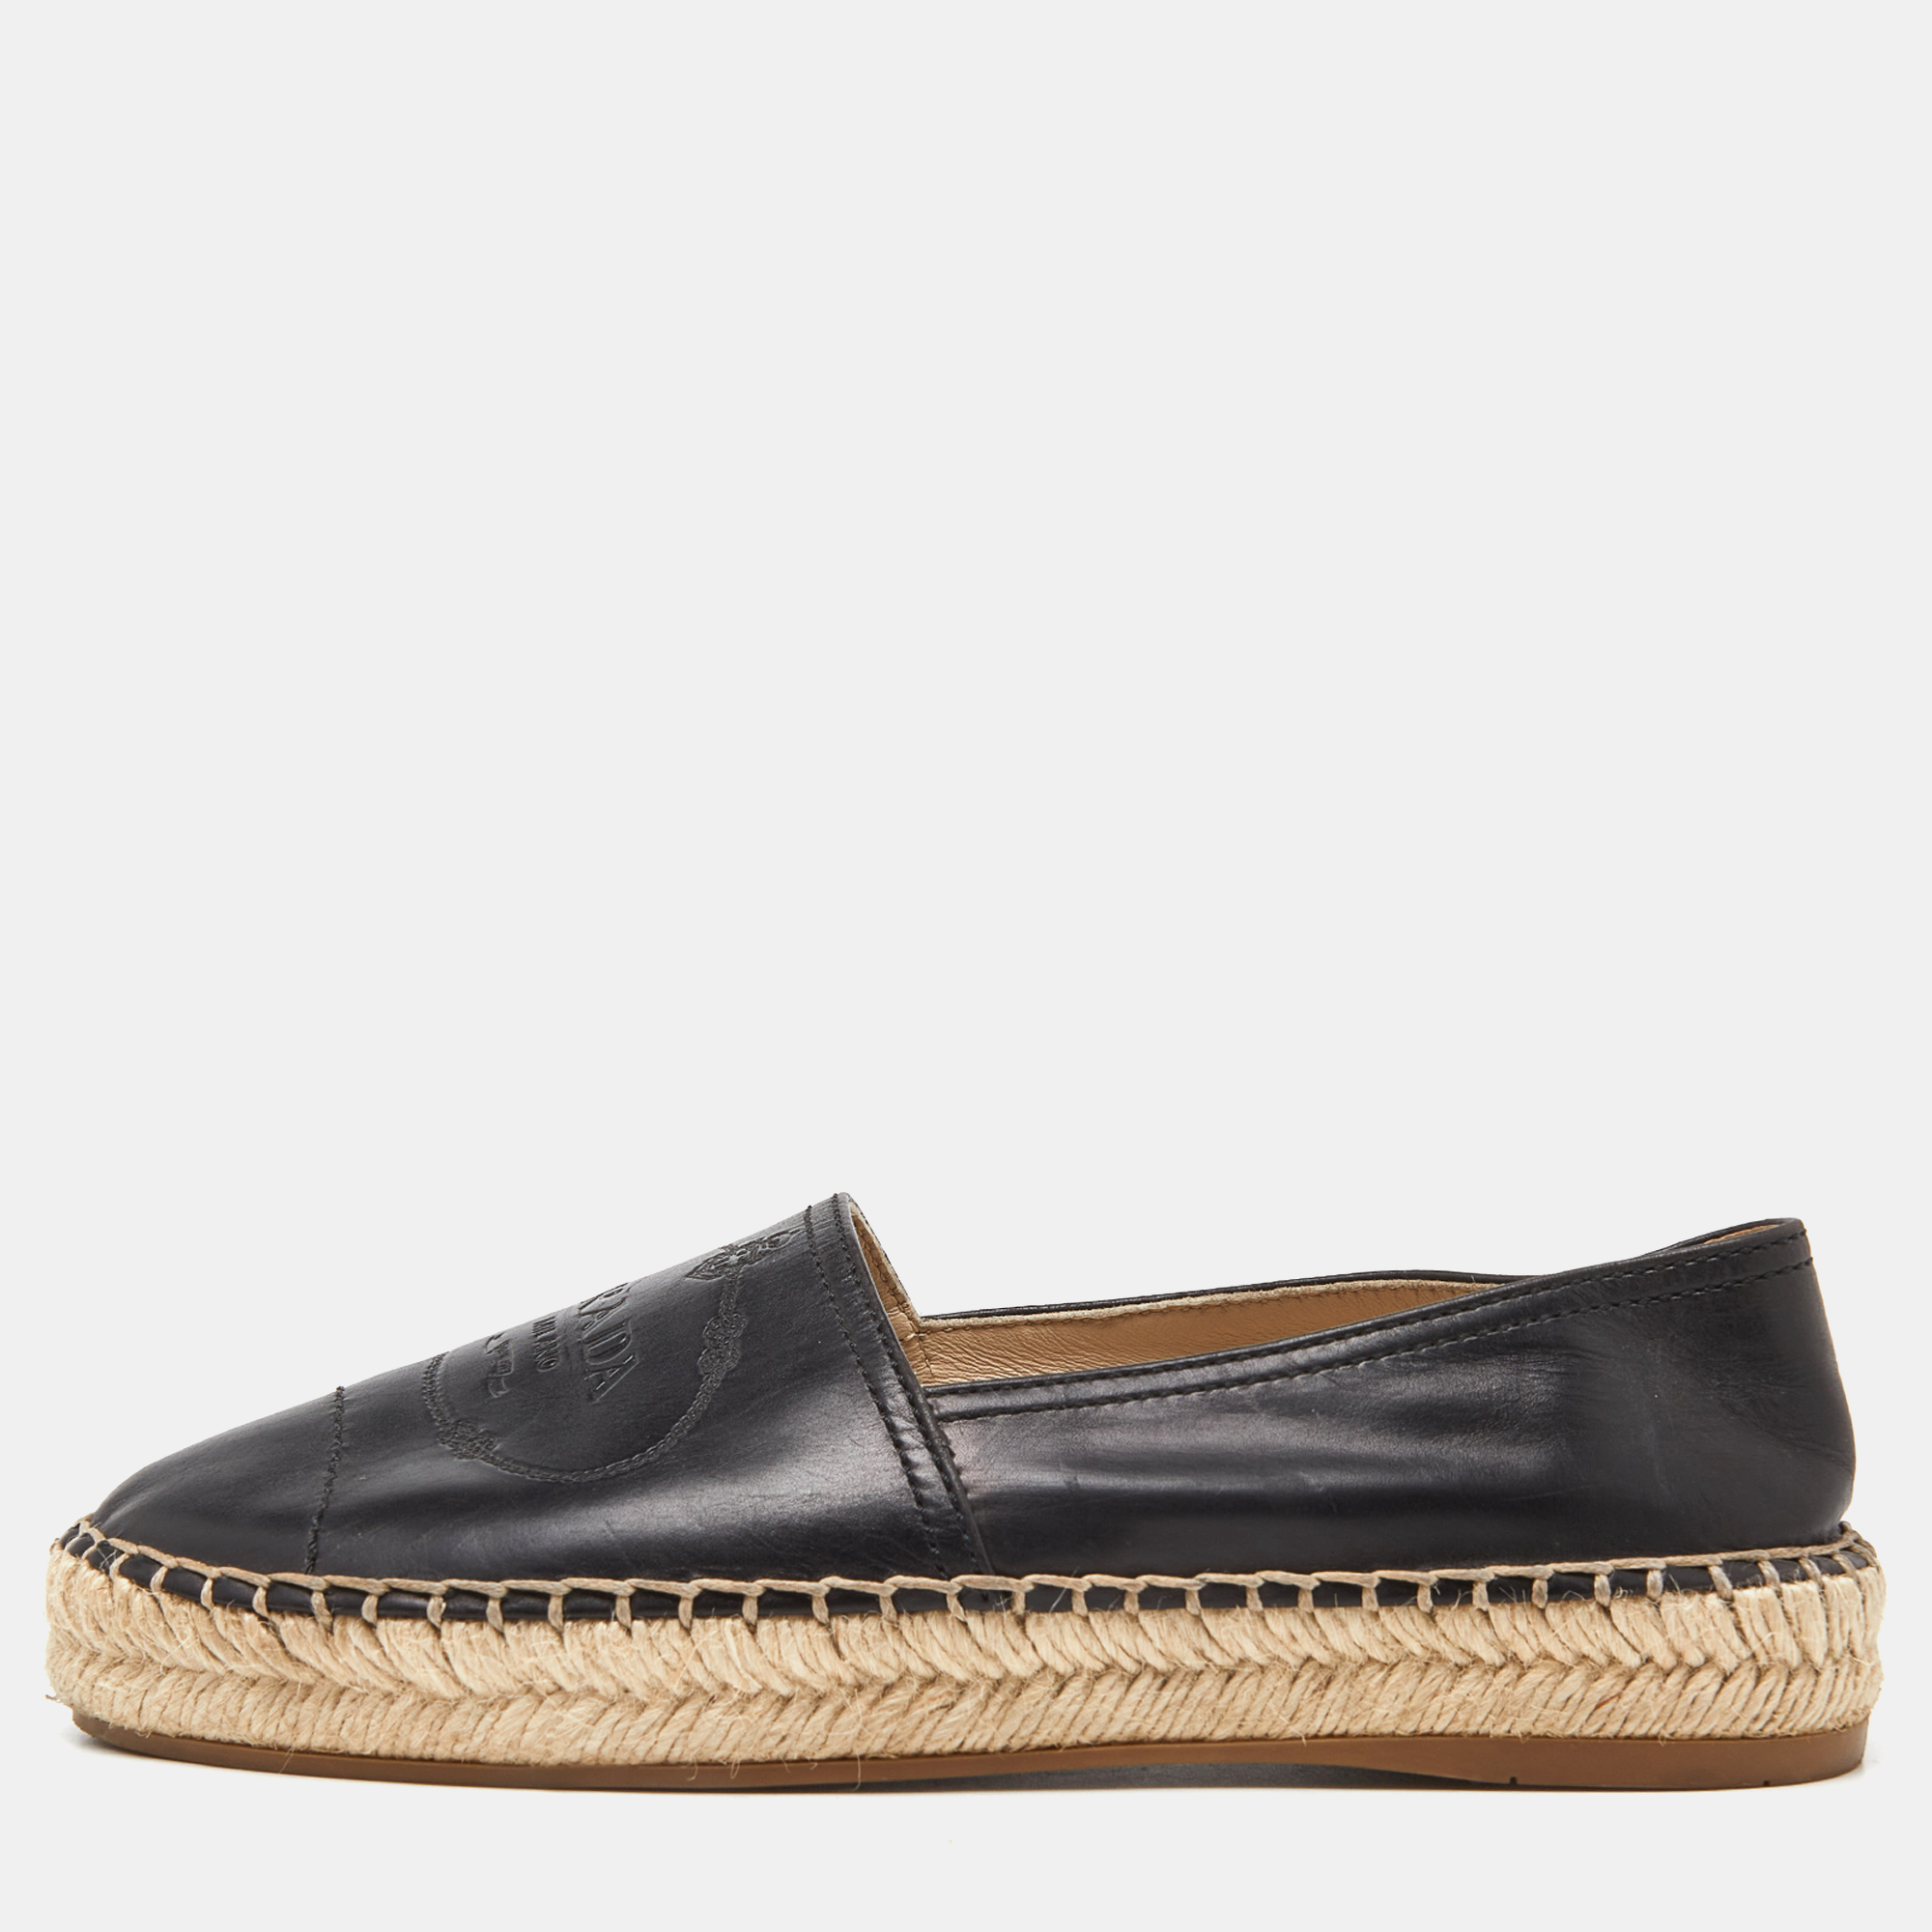 Pre-owned Prada Black Leather Espadrille Flats Size 35.5